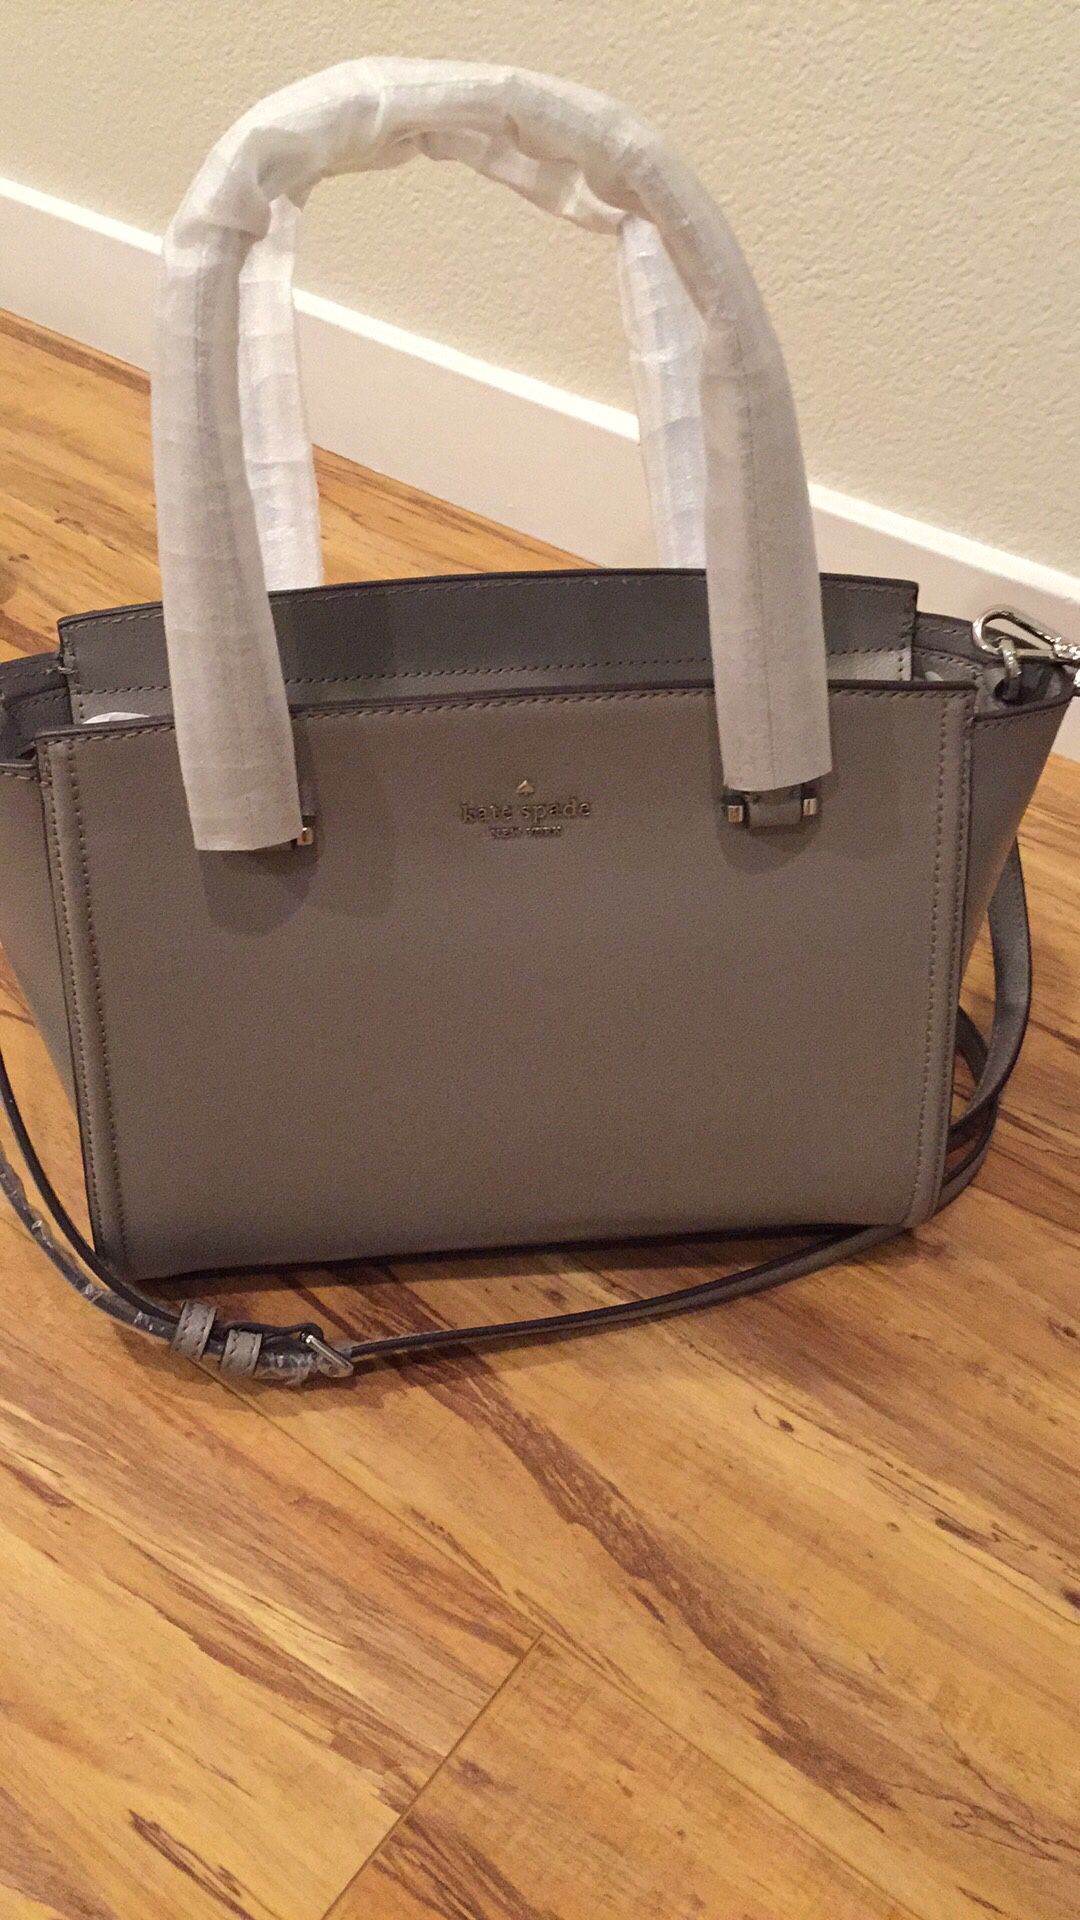 Brand new Kate spade leather tote